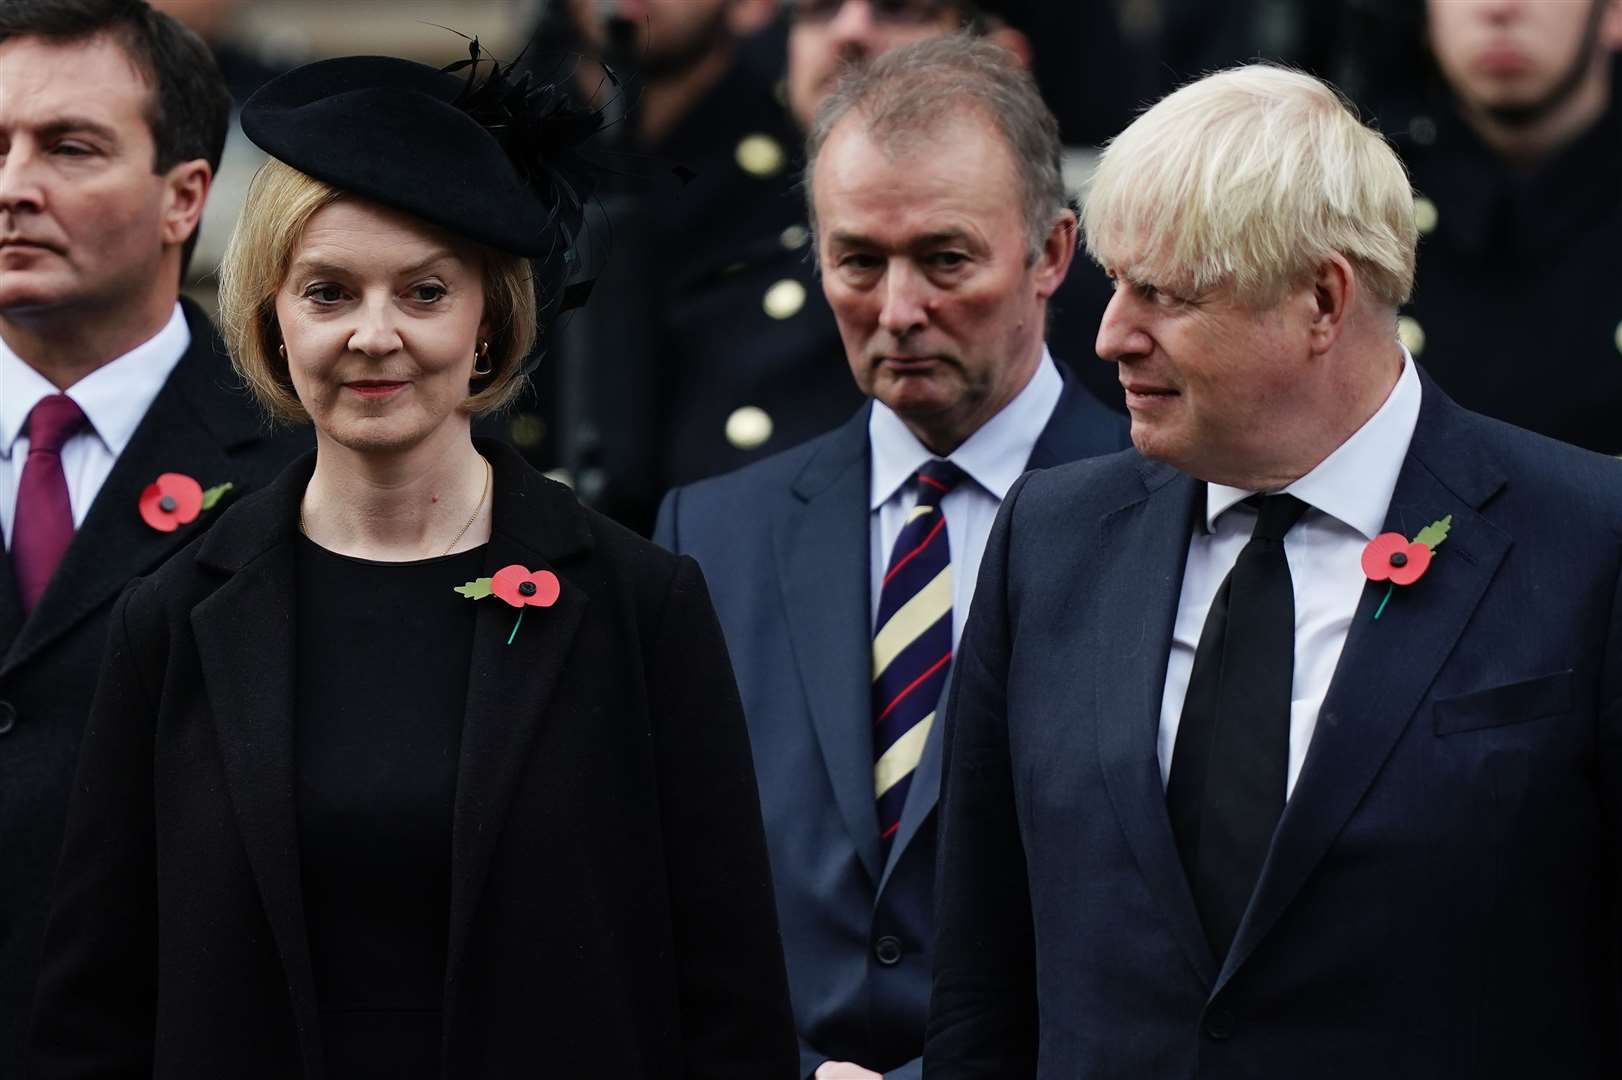 Former prime ministers Liz Truss and Boris Johnson both left No 10 last year (Aaron Chown/PA)